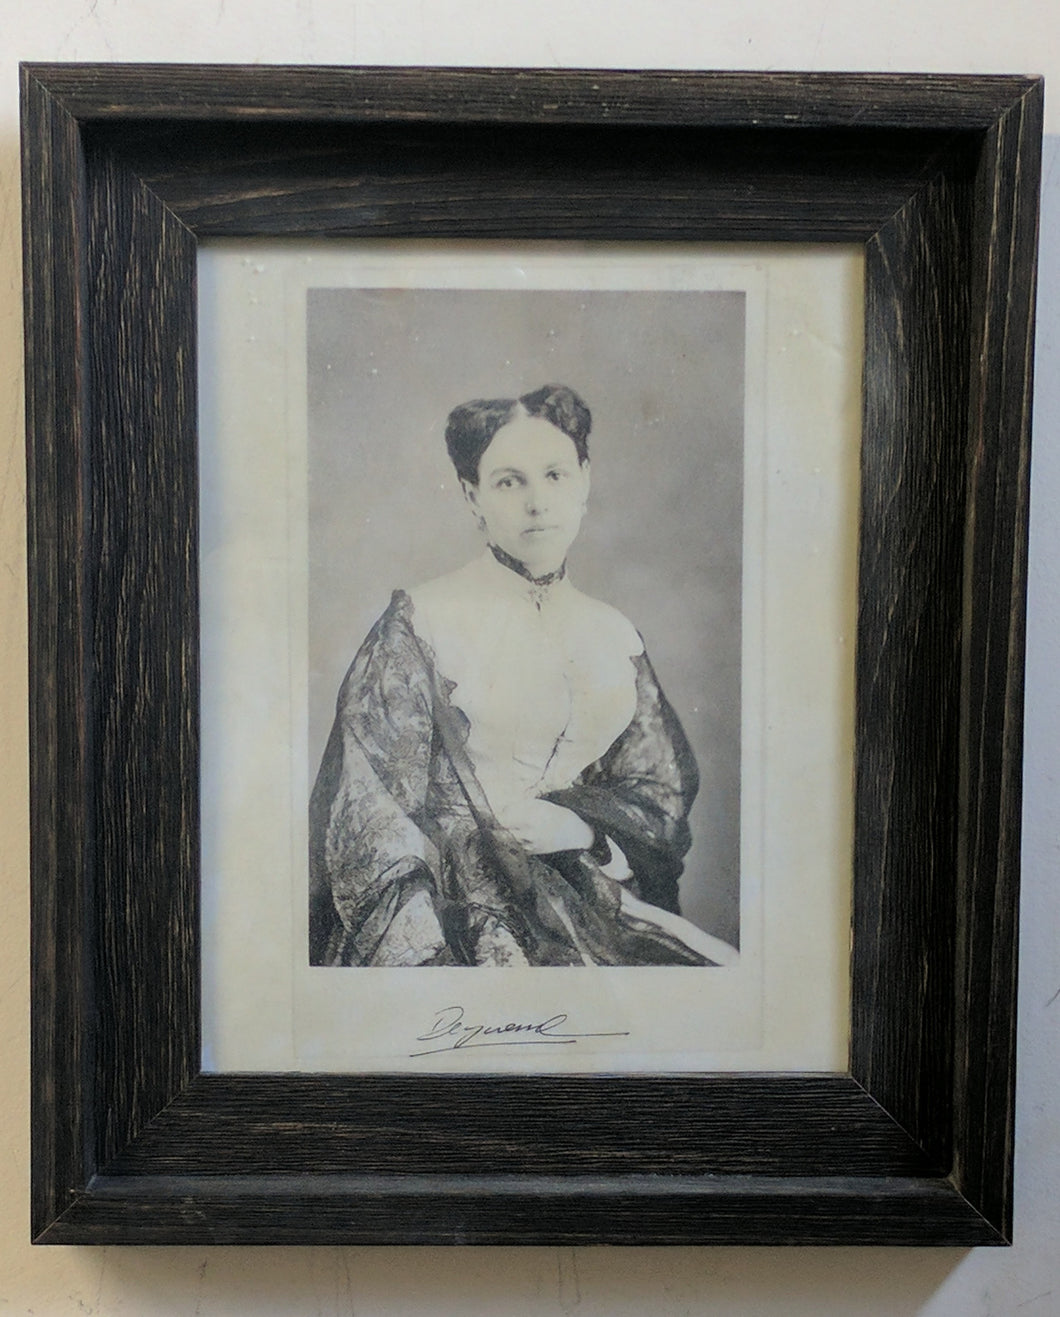 3071 Victorian Era Portrait of Woman With Calico Shawl Black and White